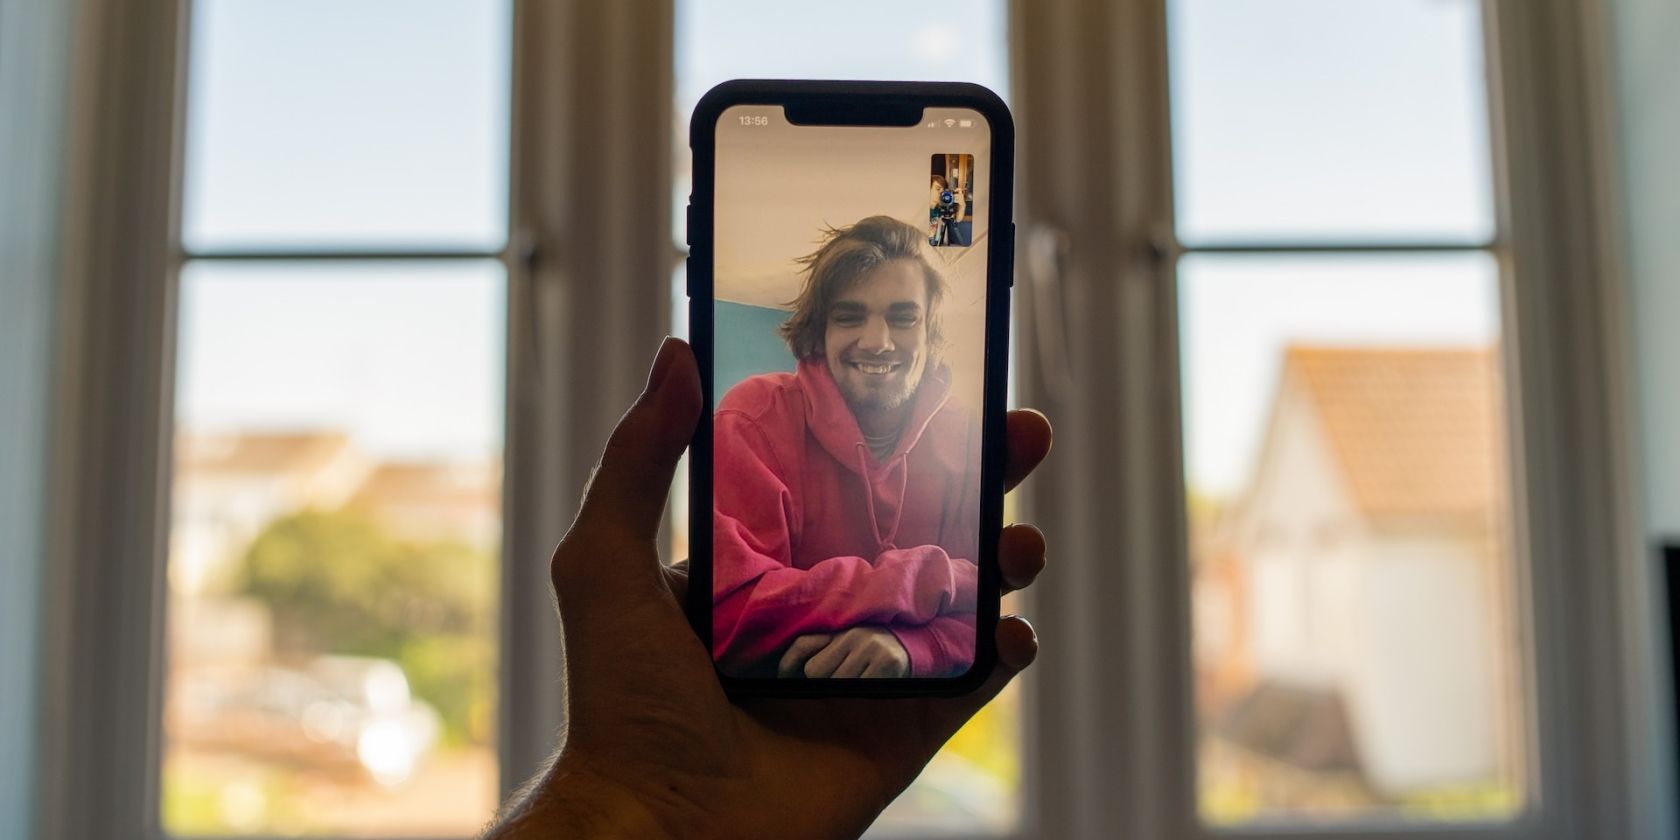 How to Video Chat Using FaceTime on Your Apple Device